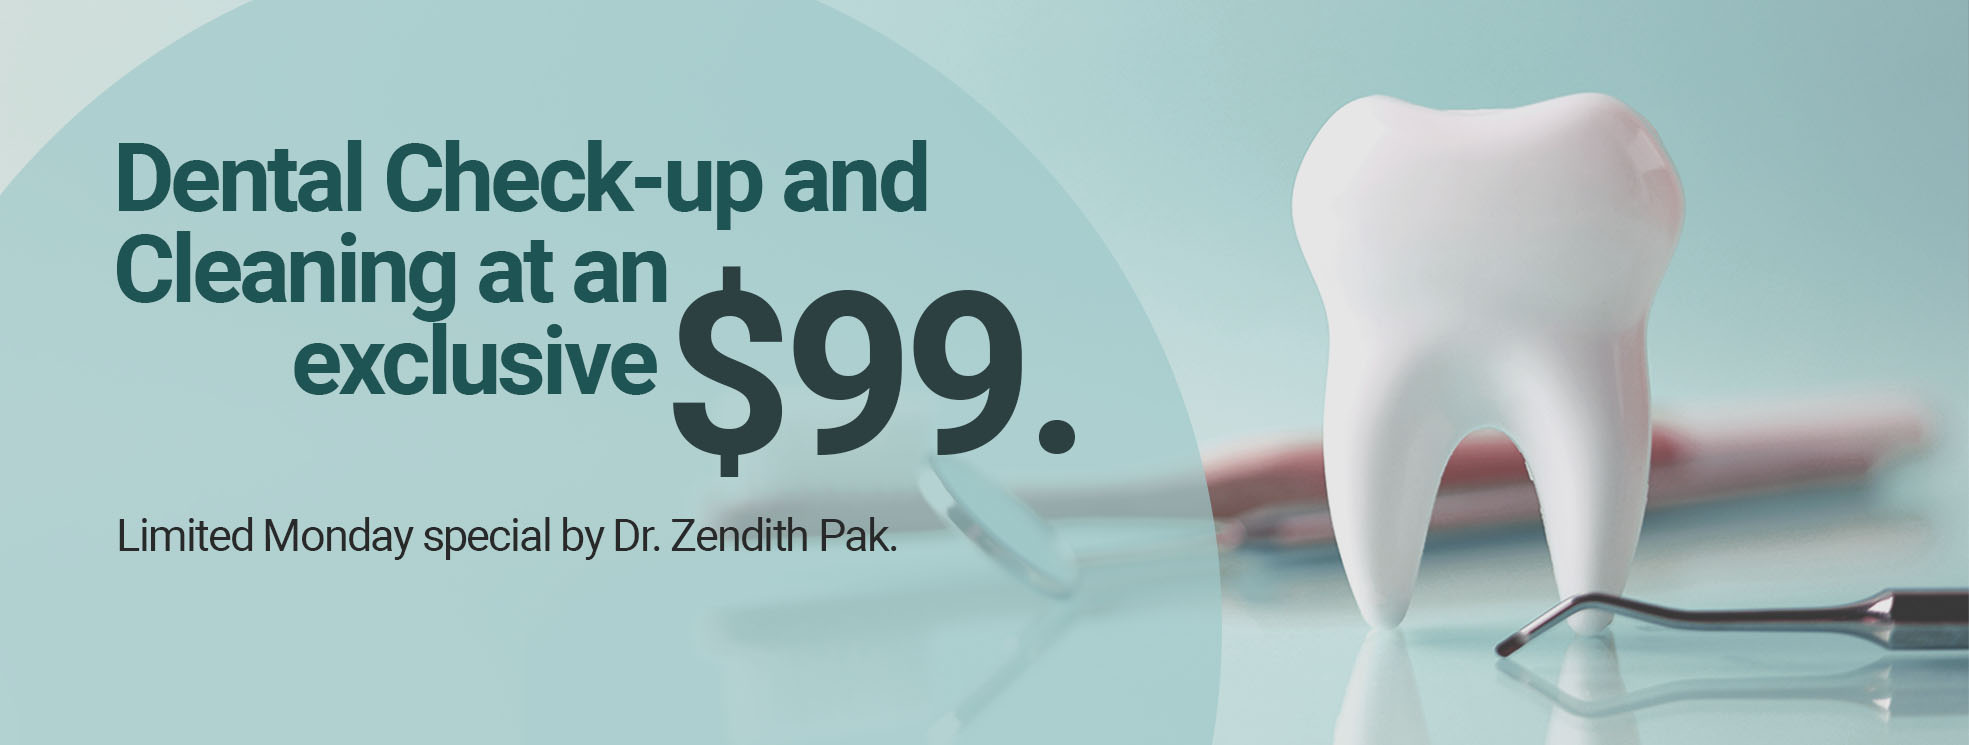 A Banner of Dental Check-up and Cleaning at an Exclusive Price